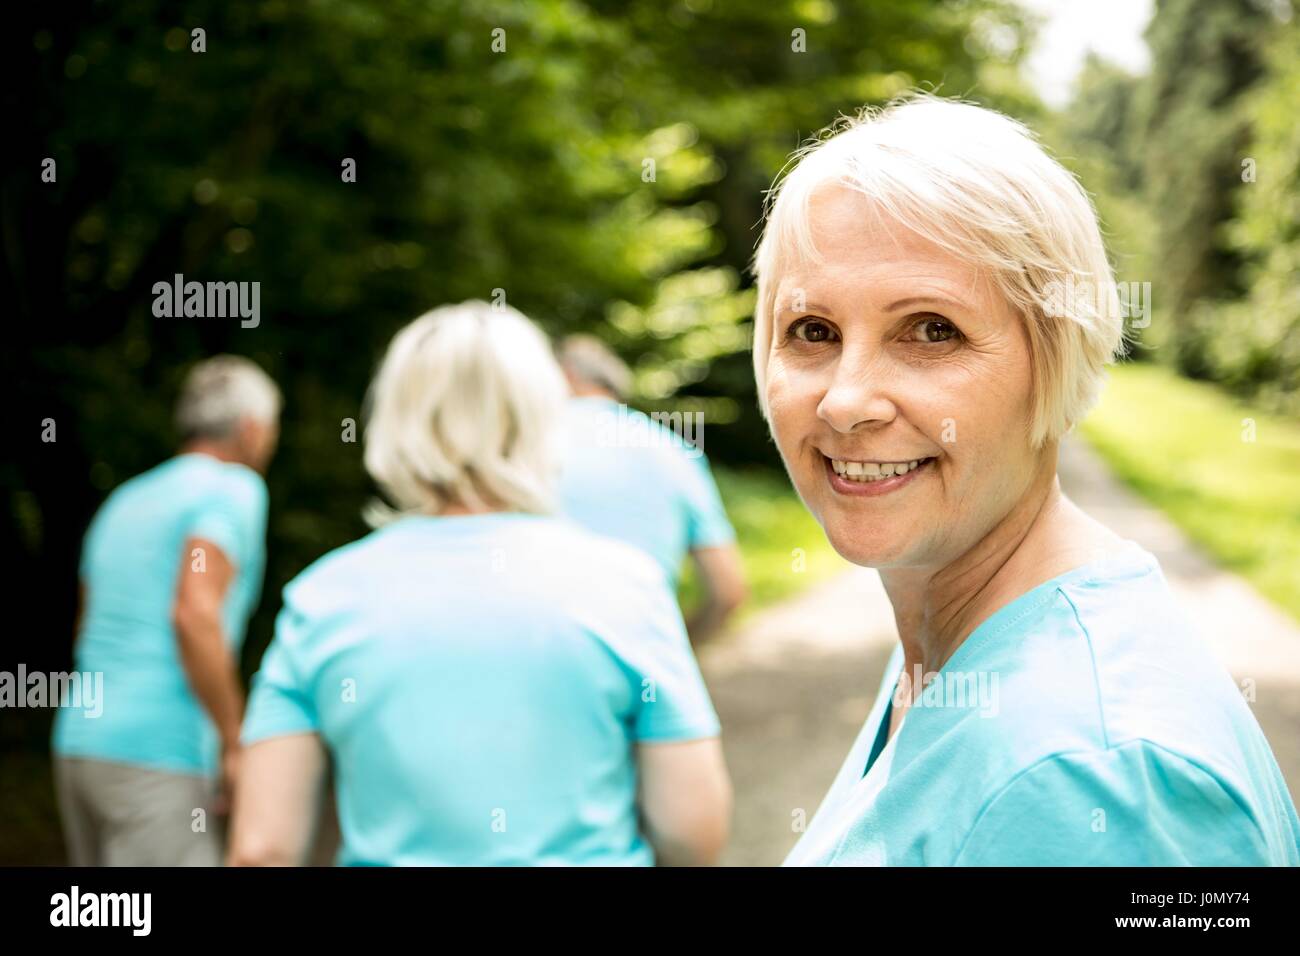 Mature woman smiling with friends in background. Stock Photo